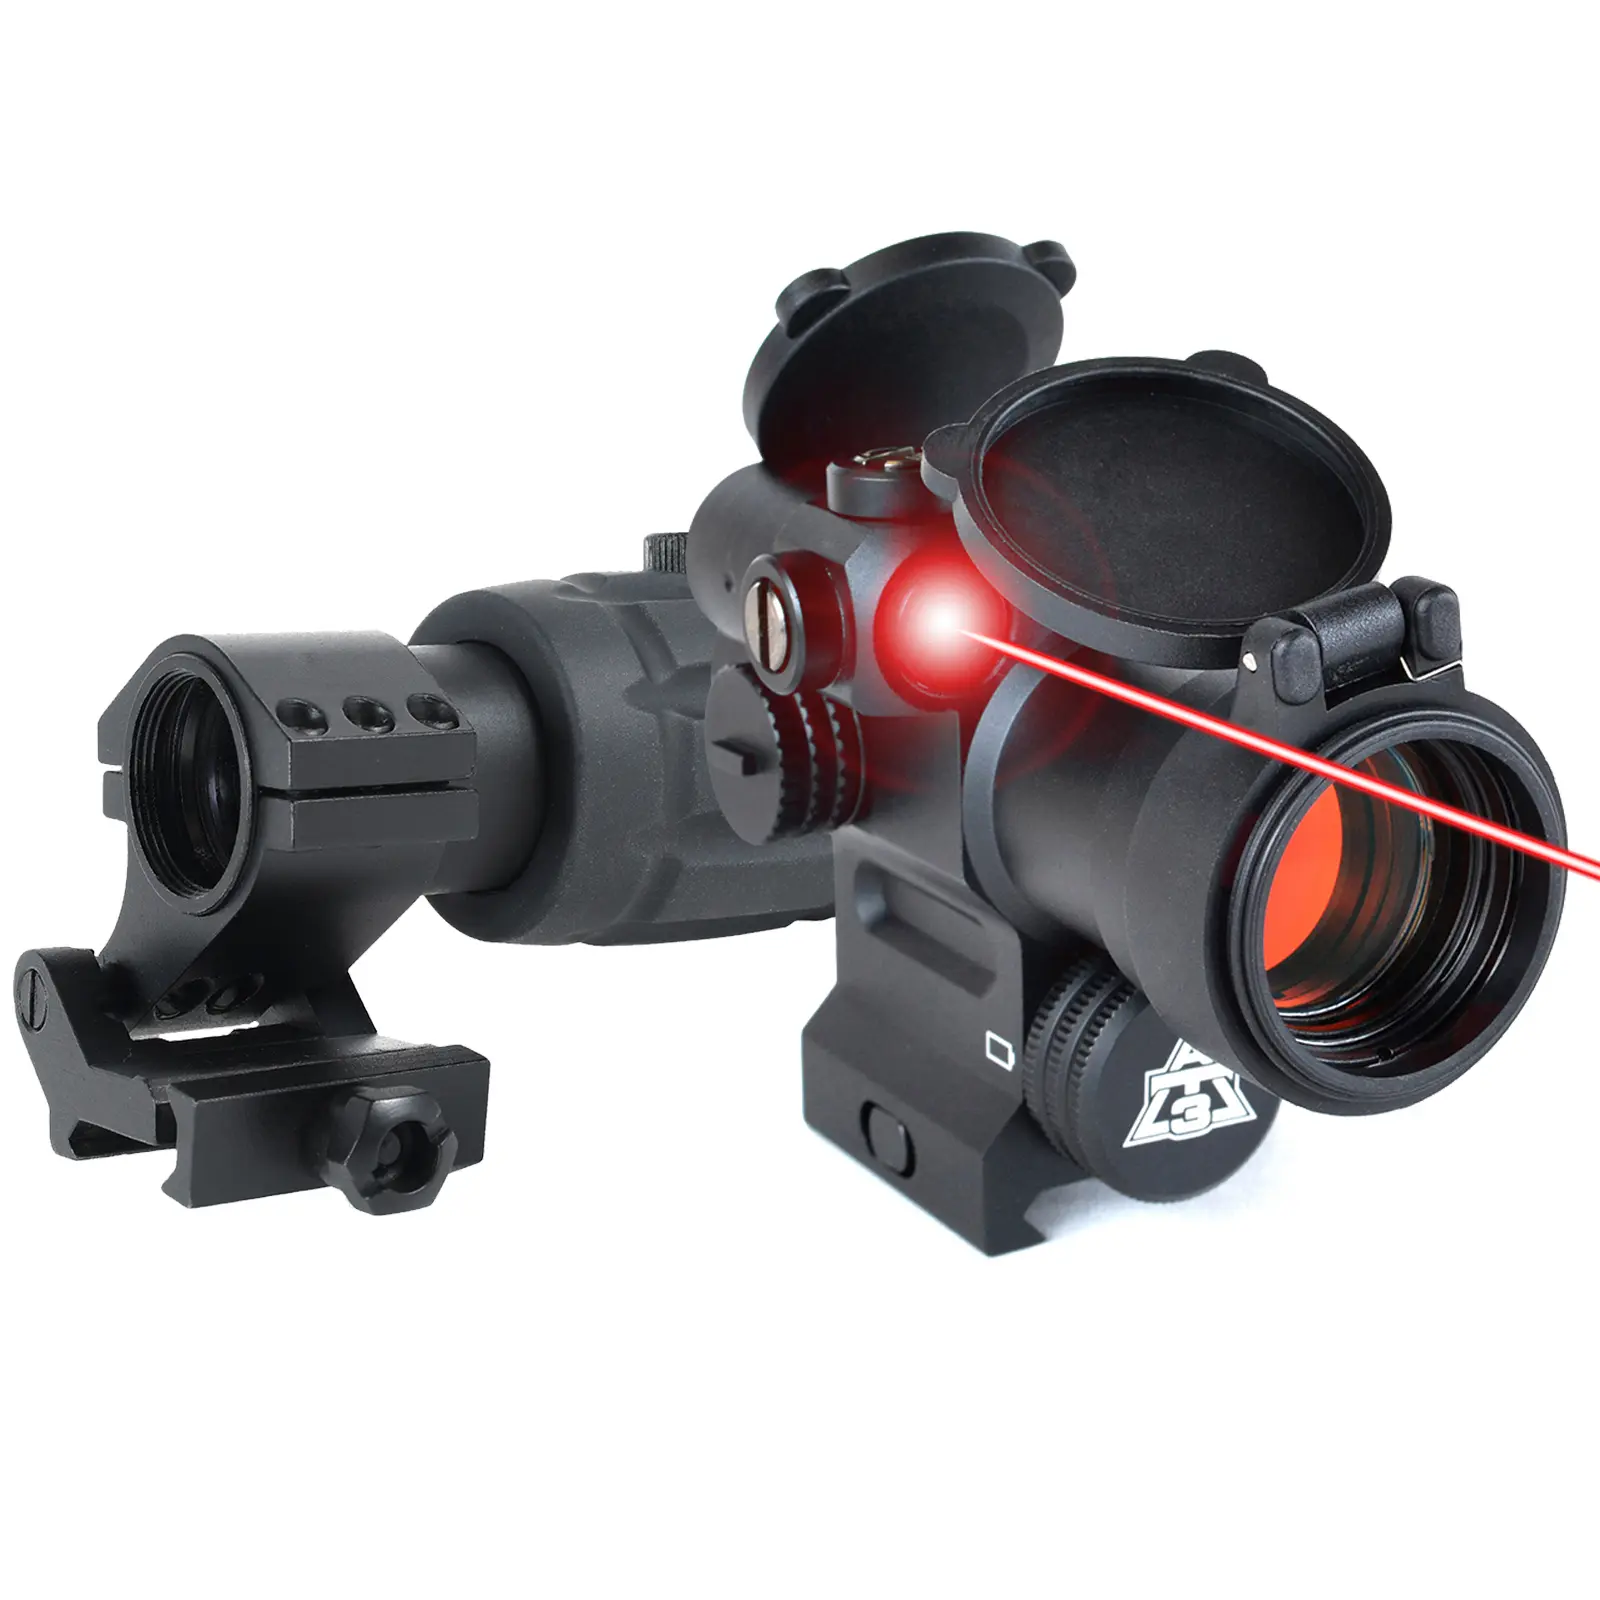 AT3™ Magnified Red Dot with Laser Sight Kit – AT3 LEOS & RRDM 3x Magnifier